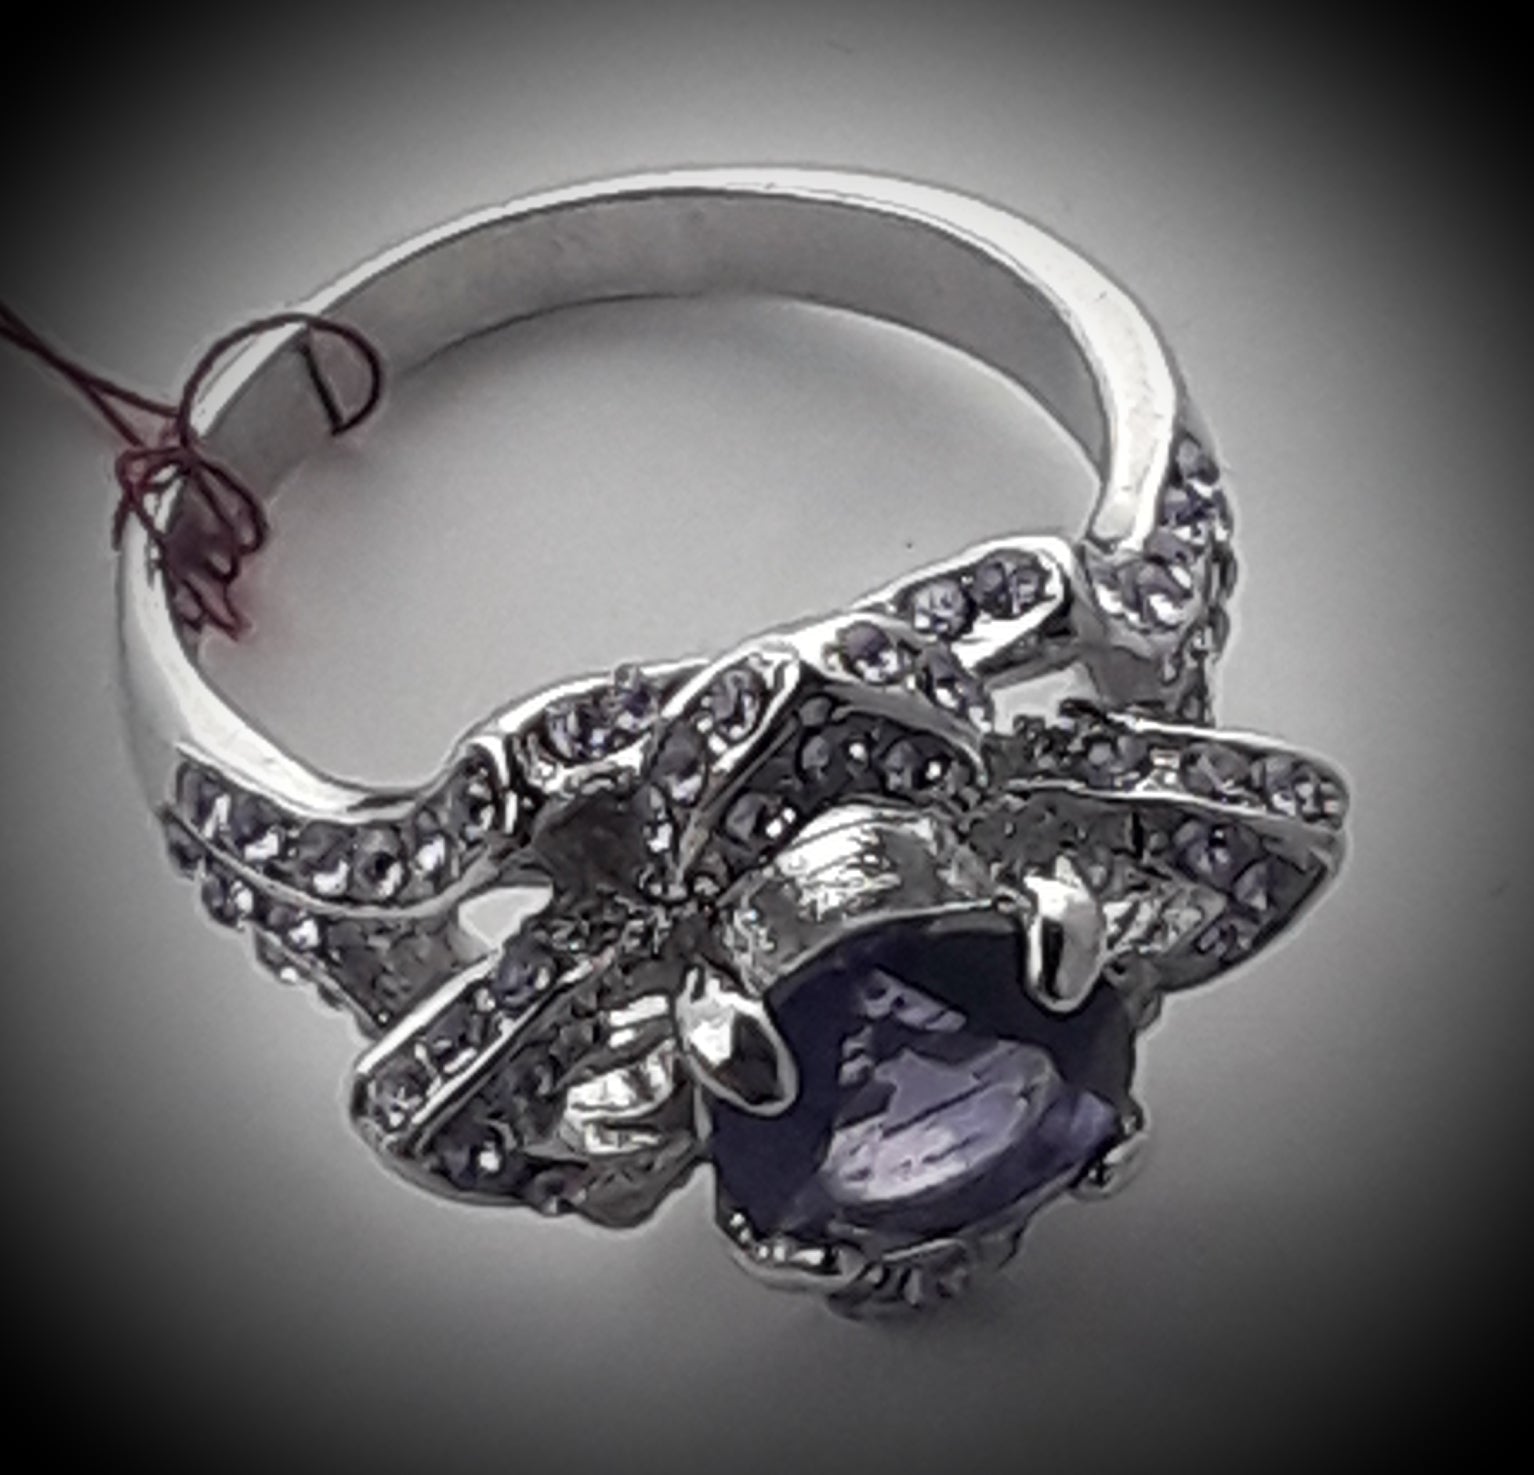 Rose ring 925silver with amythest and light or dark rhinestones